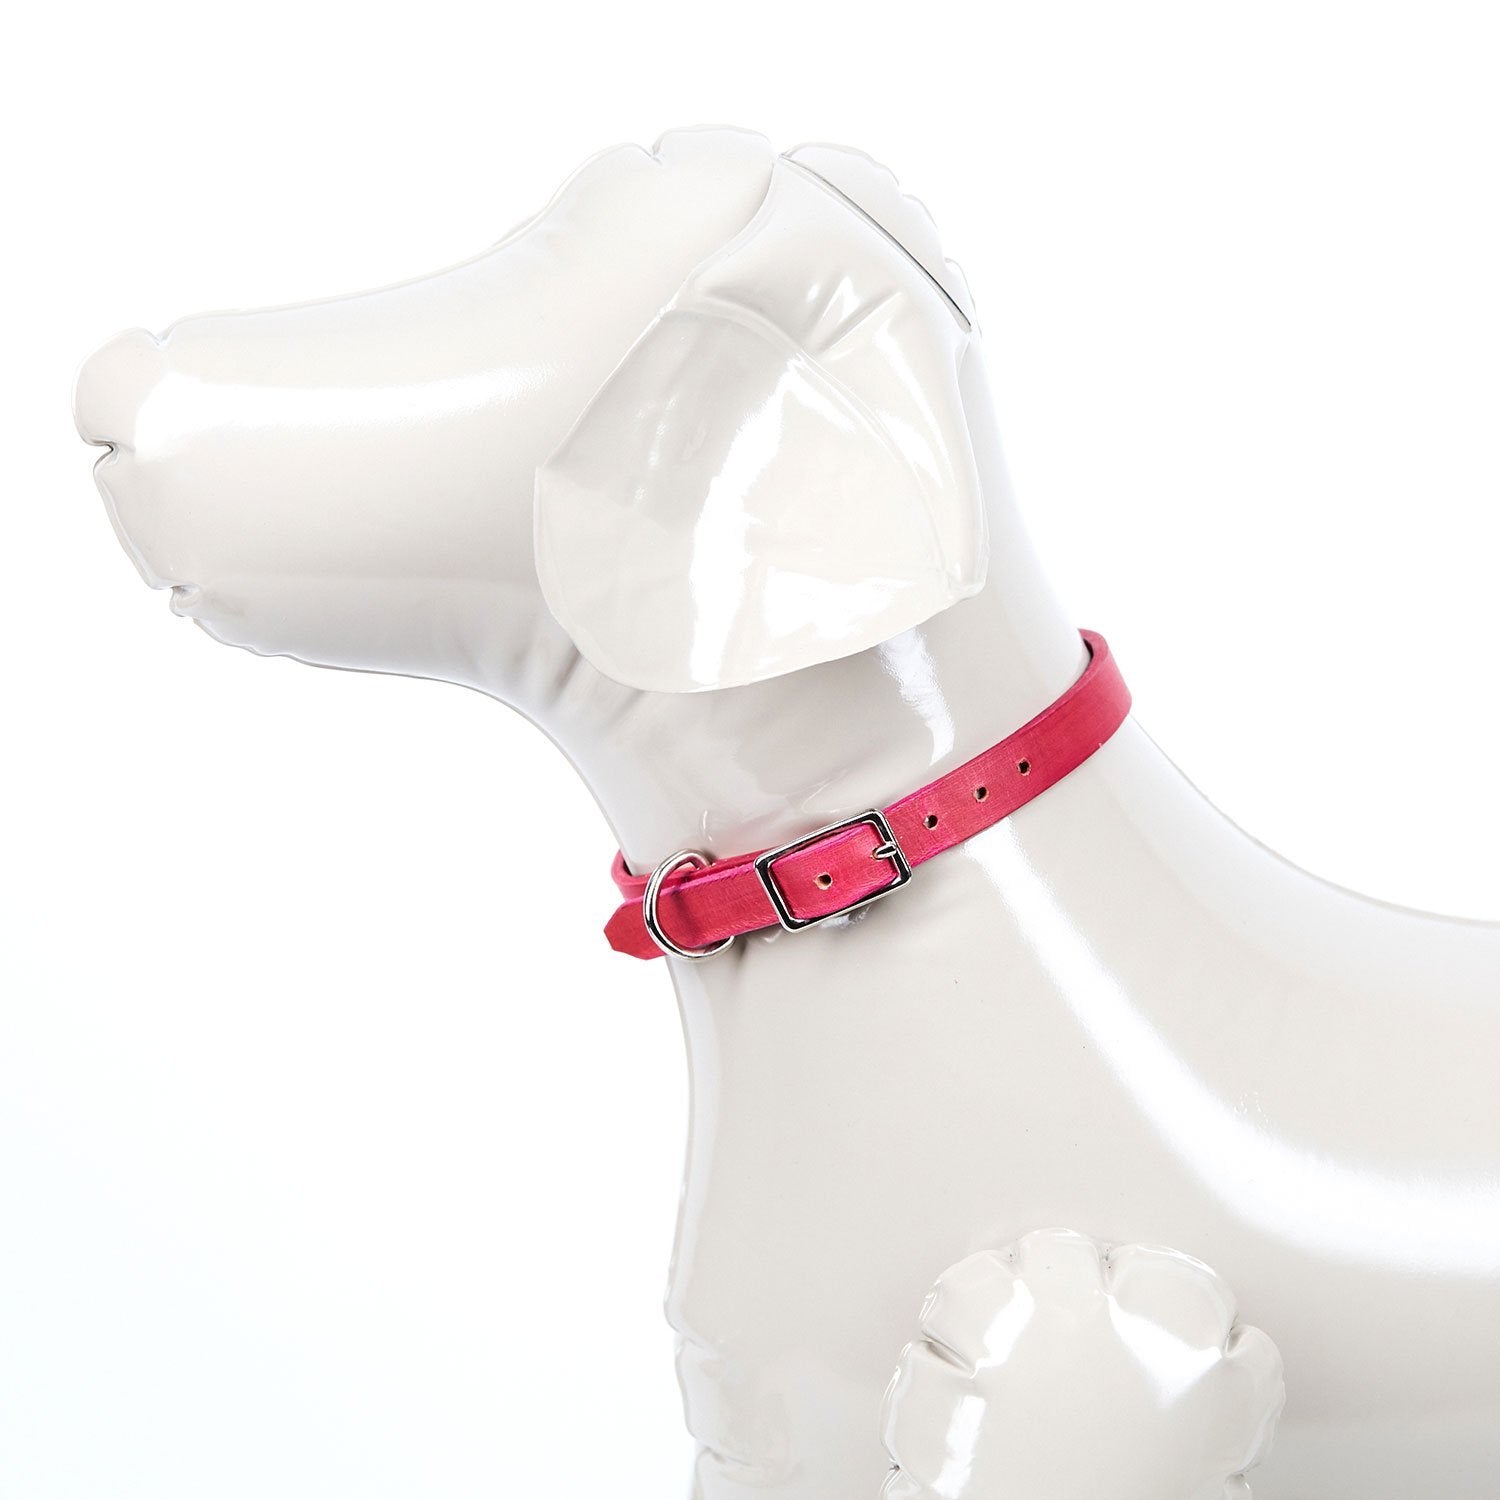 Medium Leather Dog Collar - Available in More Colors